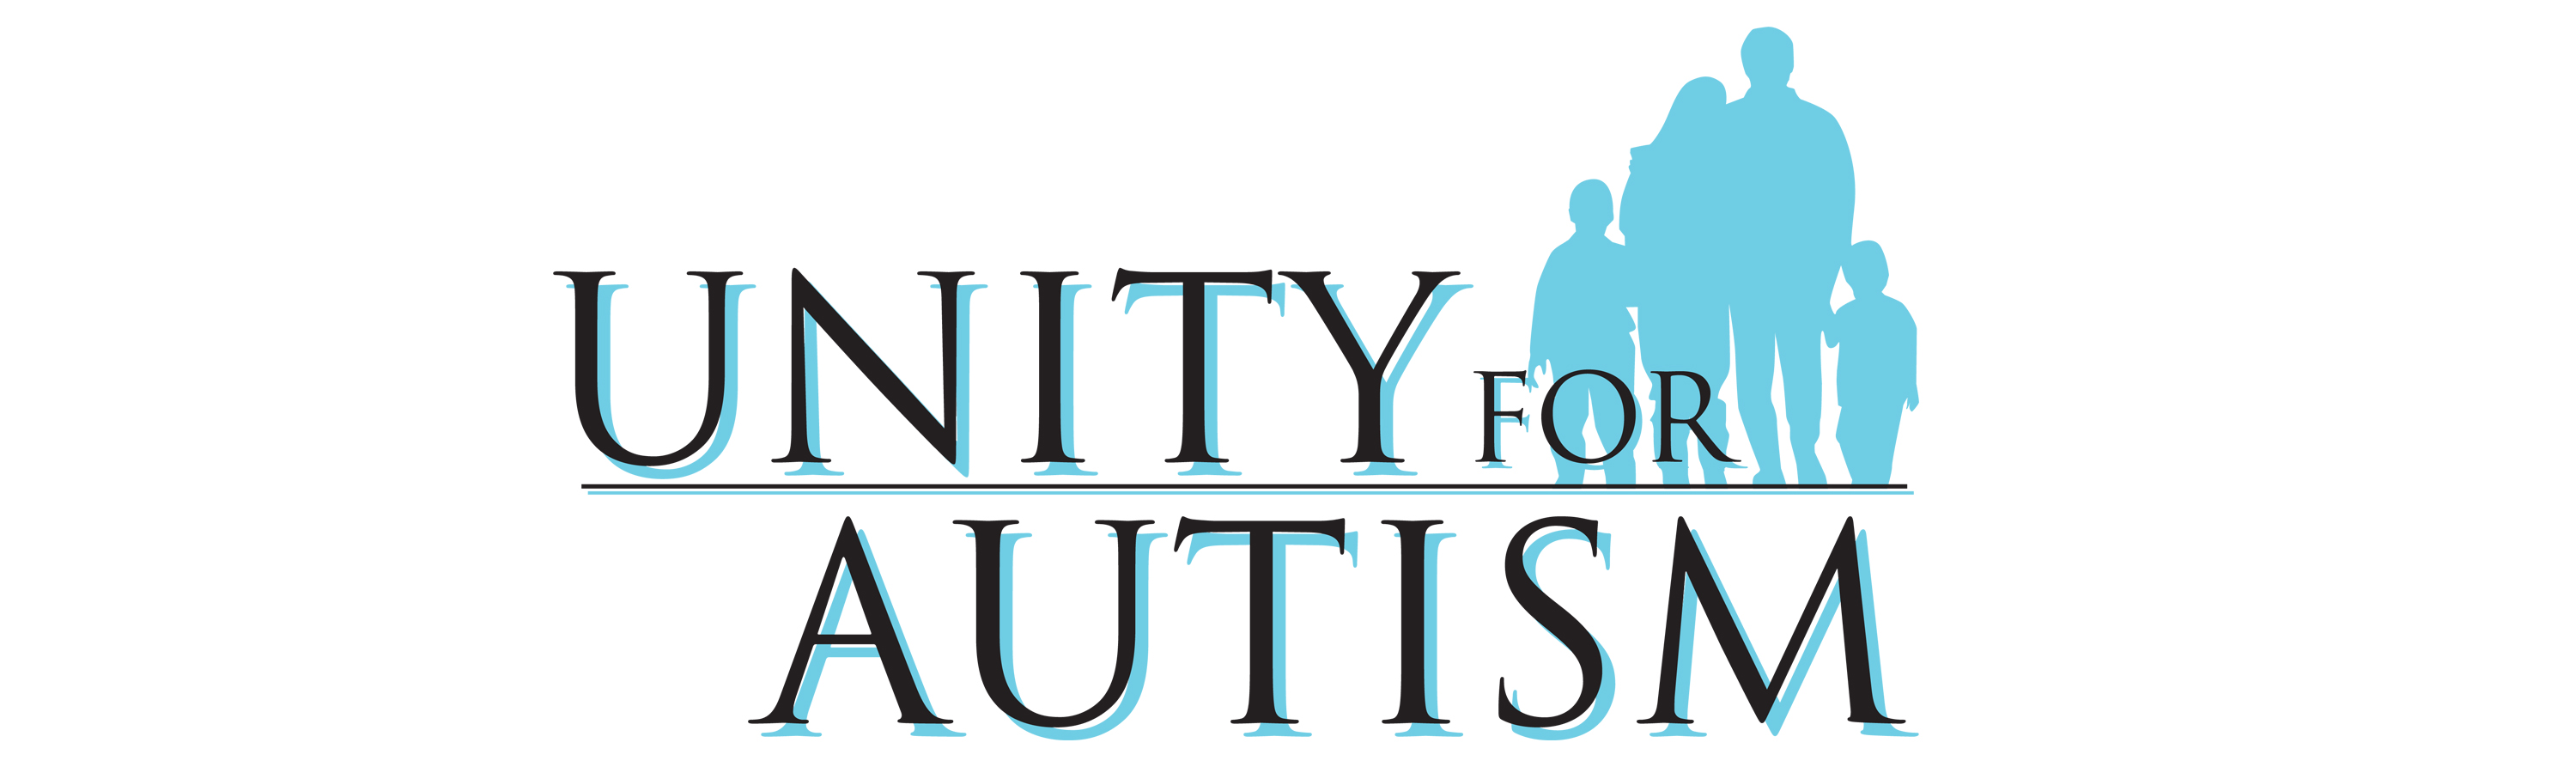 Unity For Autism